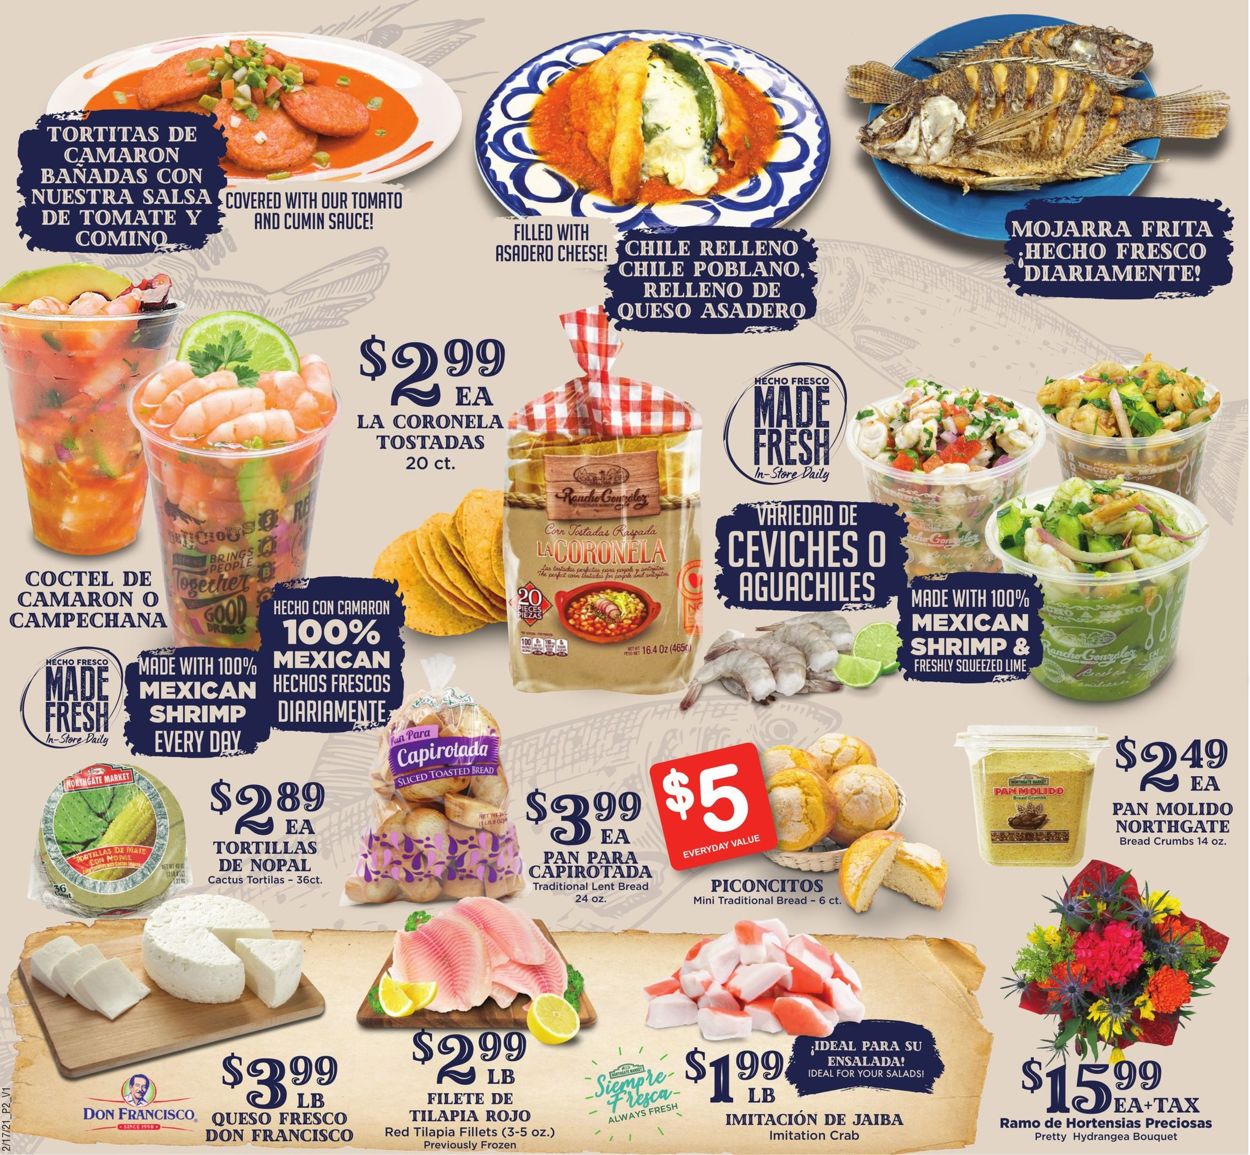 Northgate Market Ad from 02/17/2021